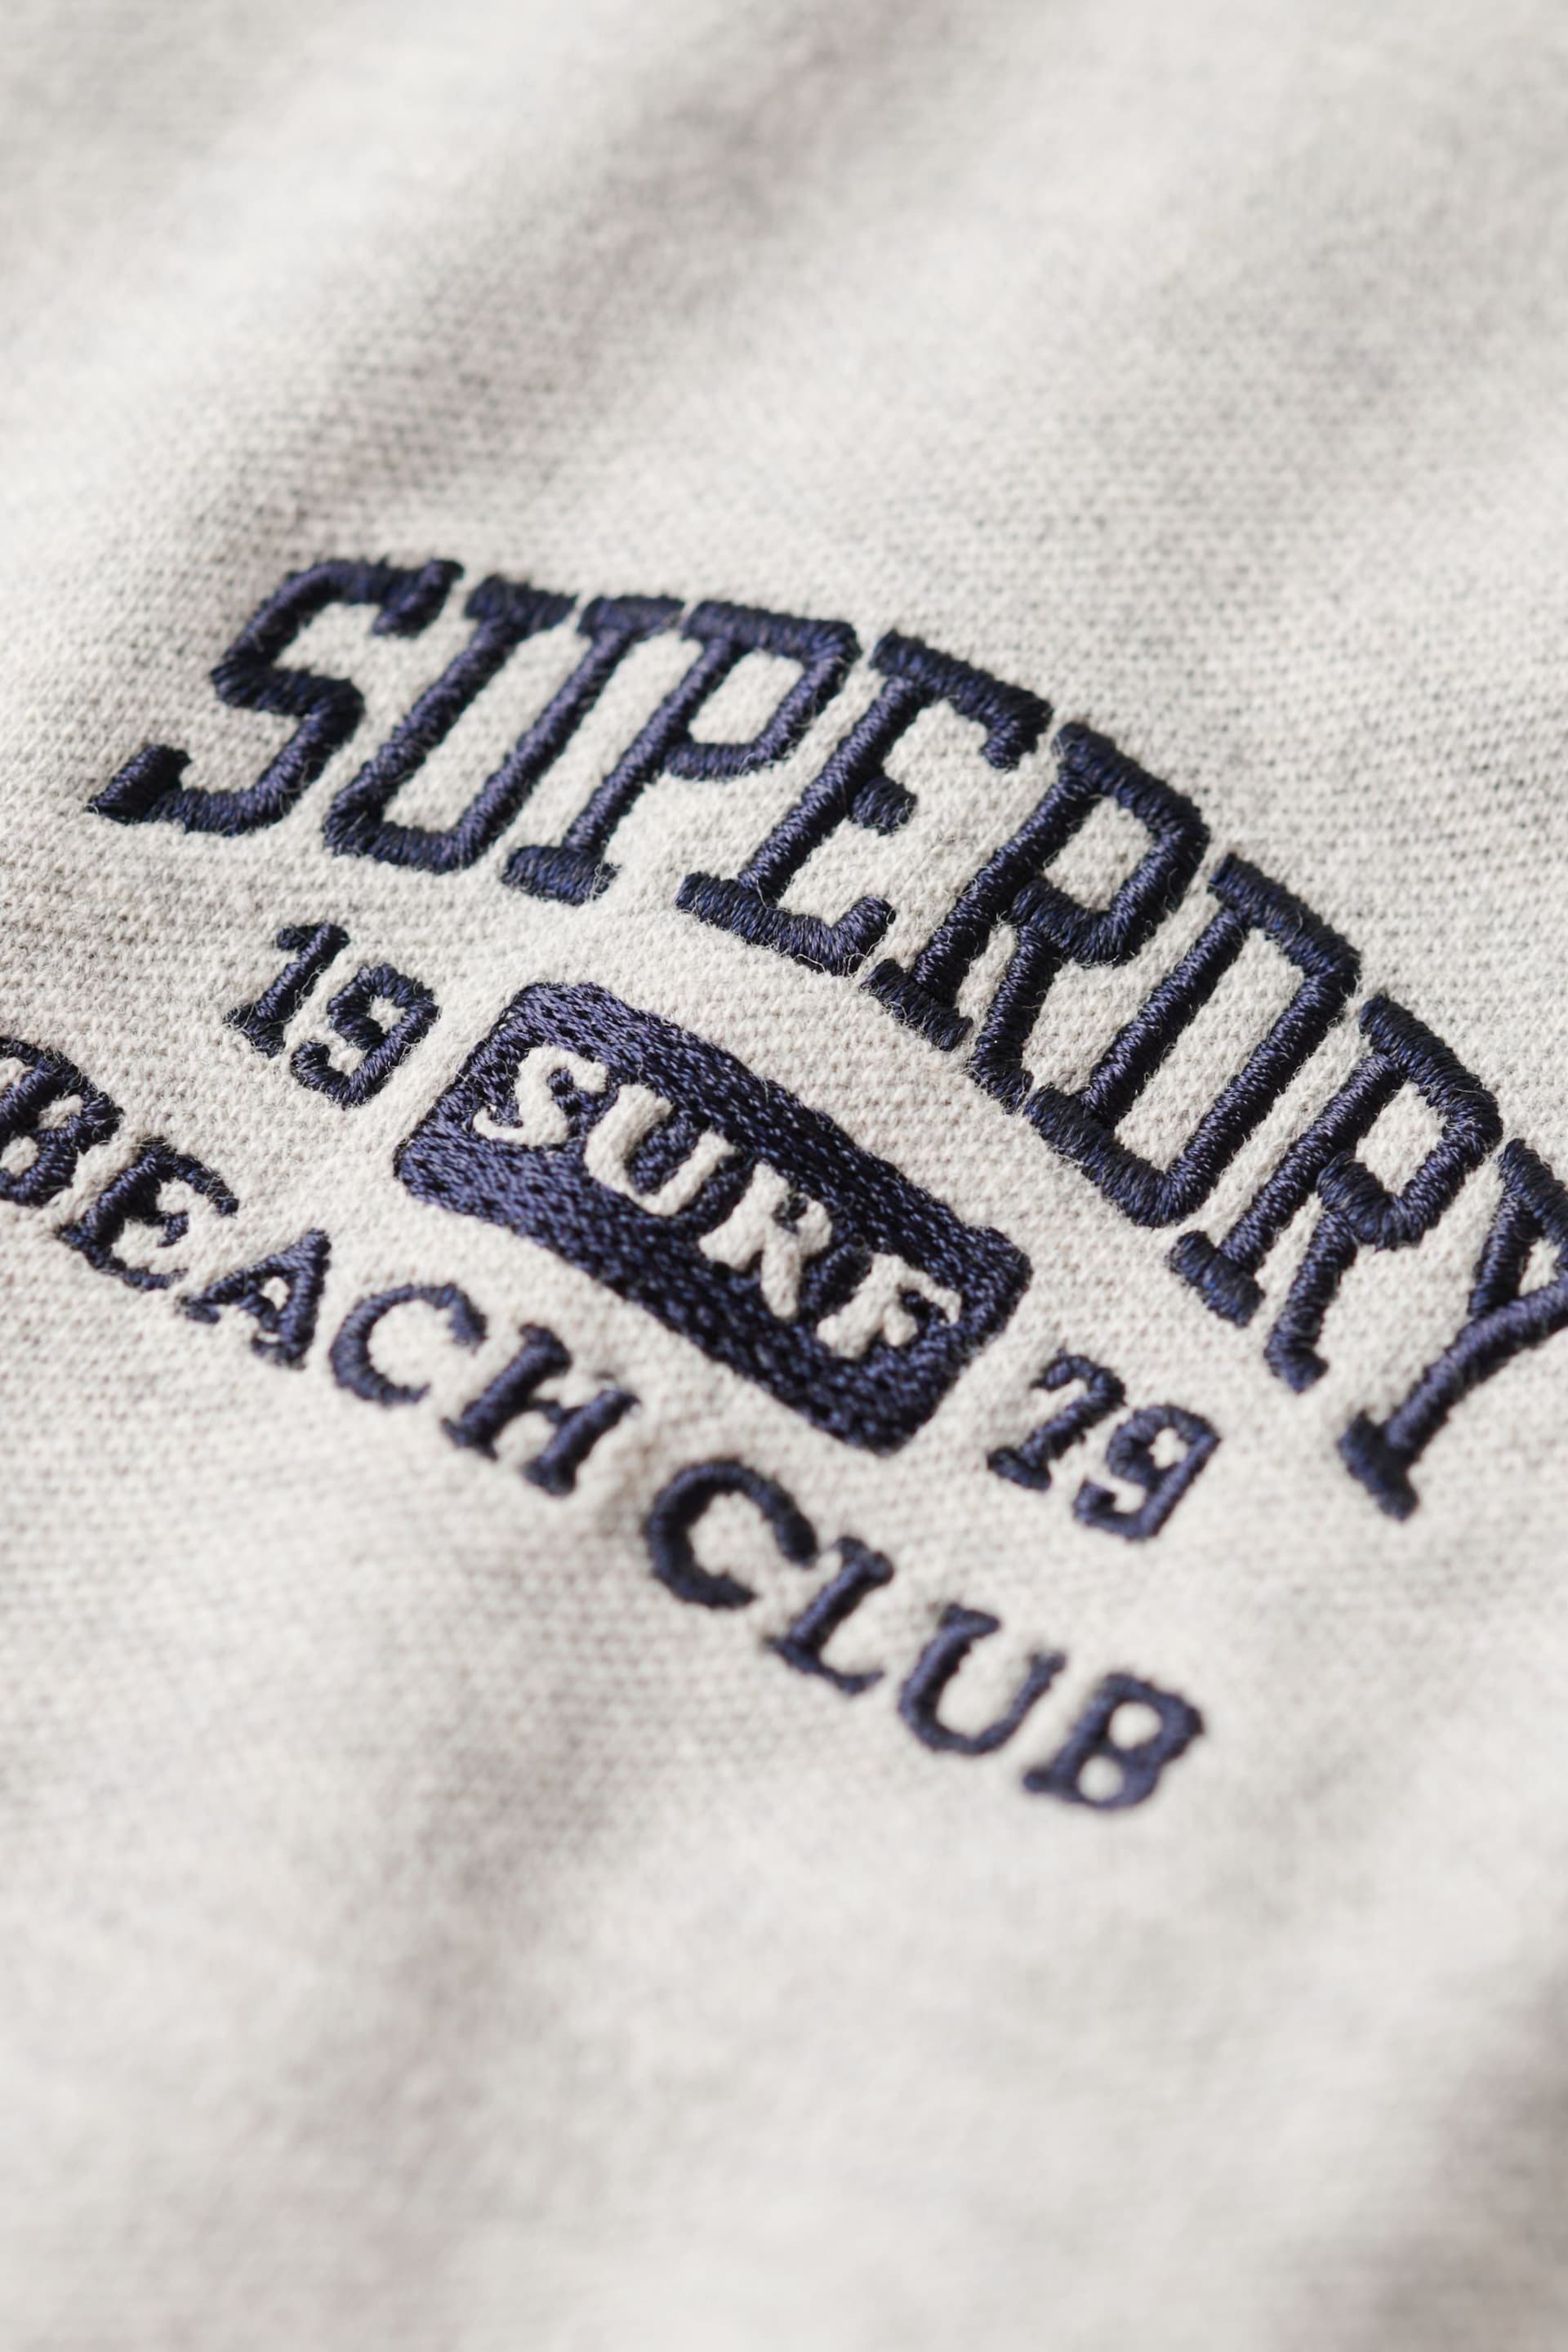 SUPERDRY Grey SUPERDRY 90s Fitted Polo Shirt - Image 5 of 6